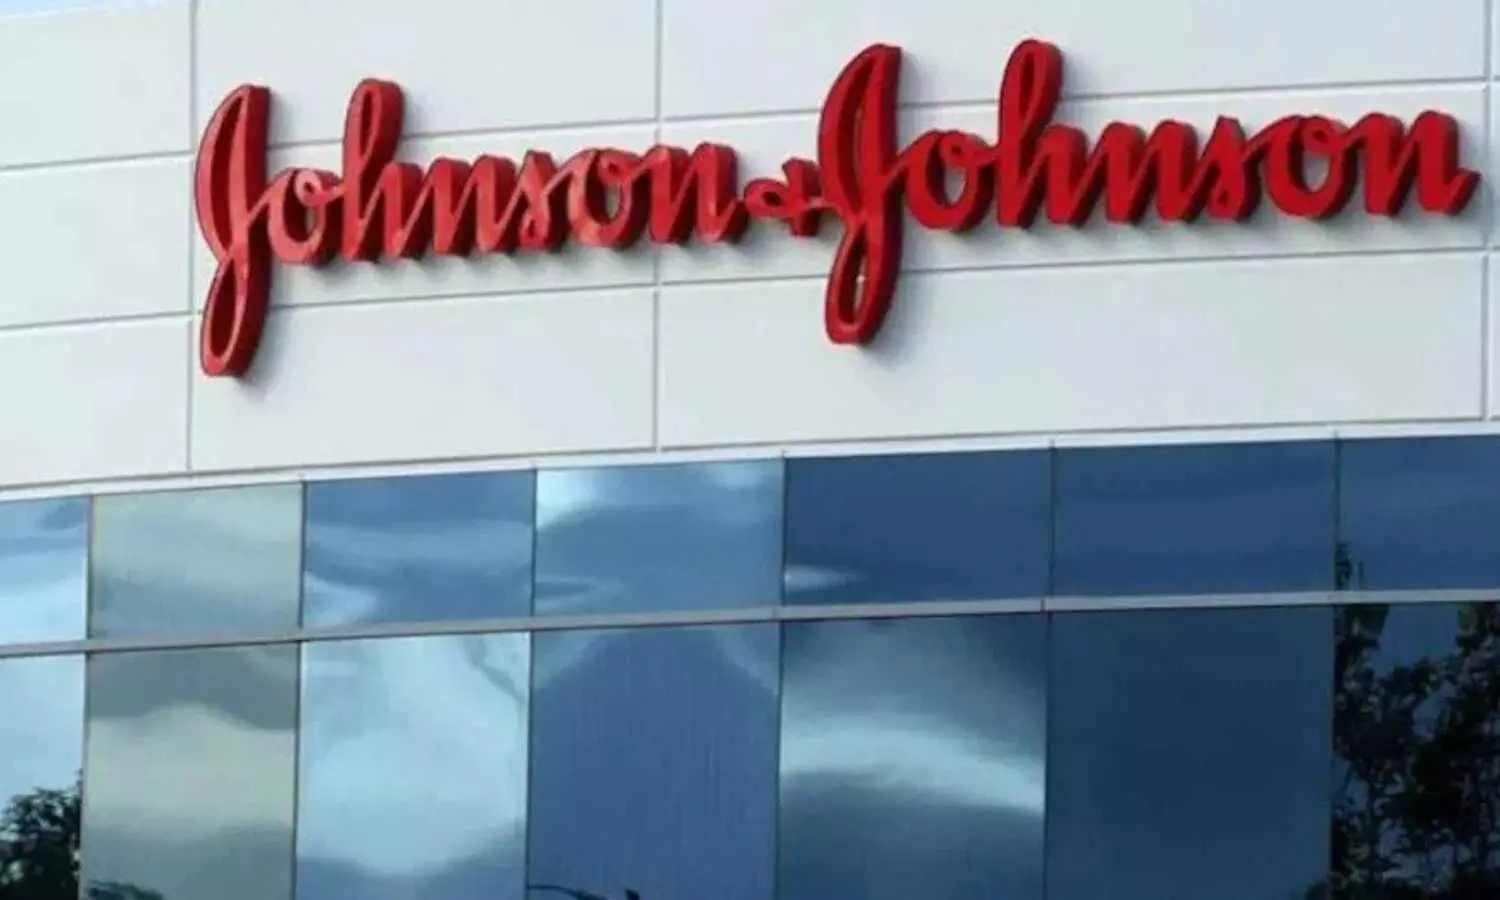 JnJ proposes USD 8.9 billion settlement of talc cancer claims